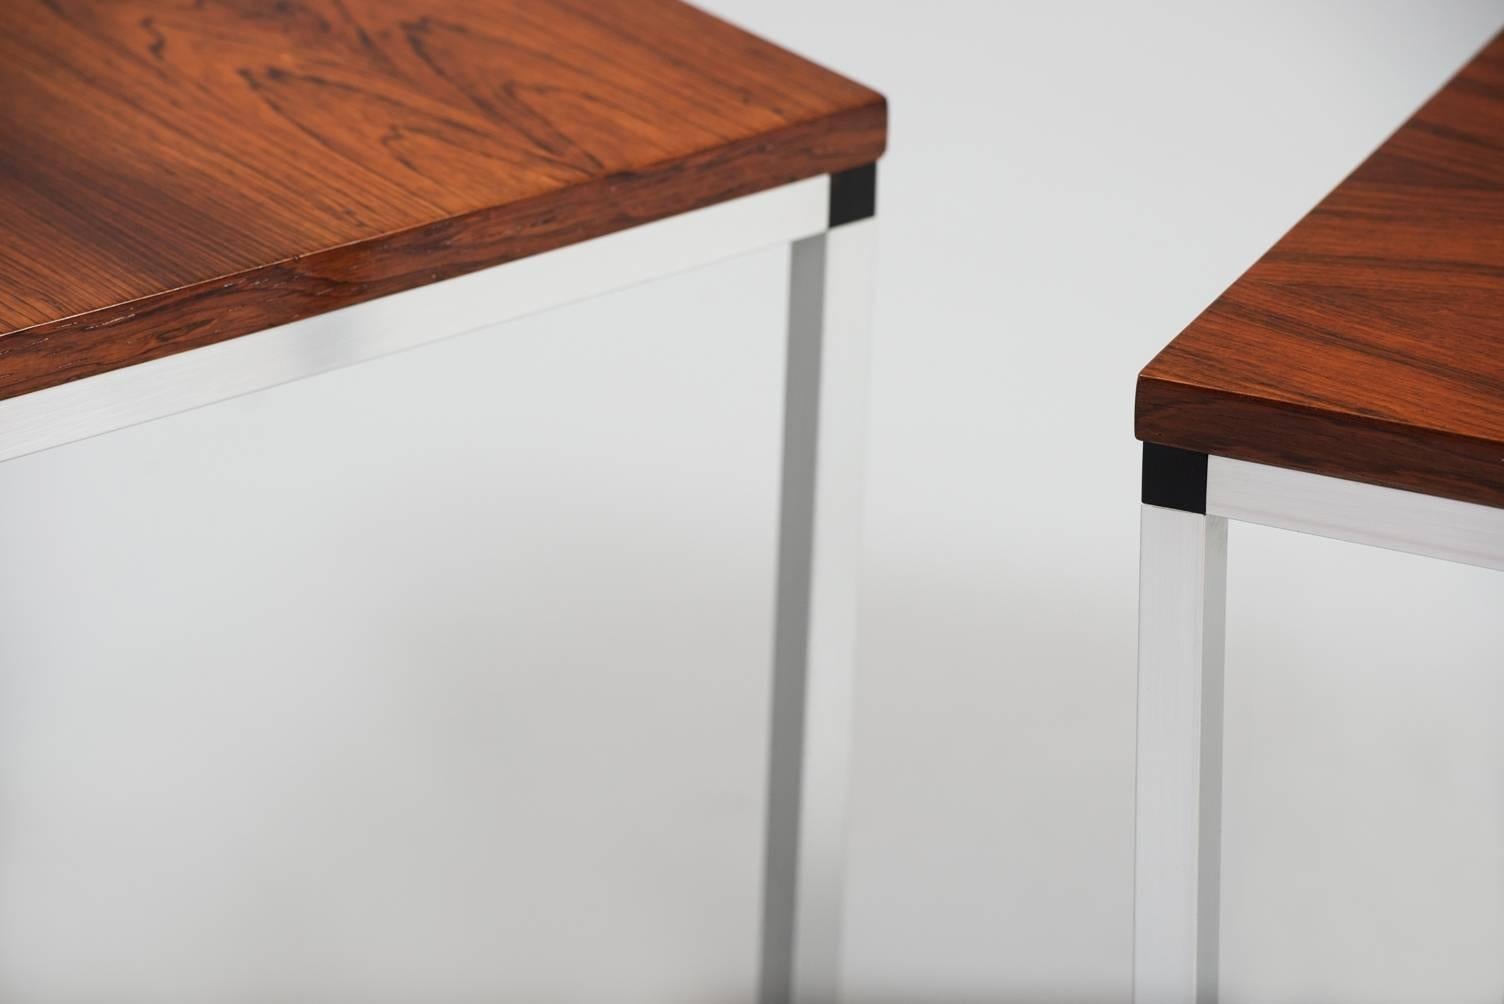 Rosewood and chrome side tables, one pair, can be sold separately.